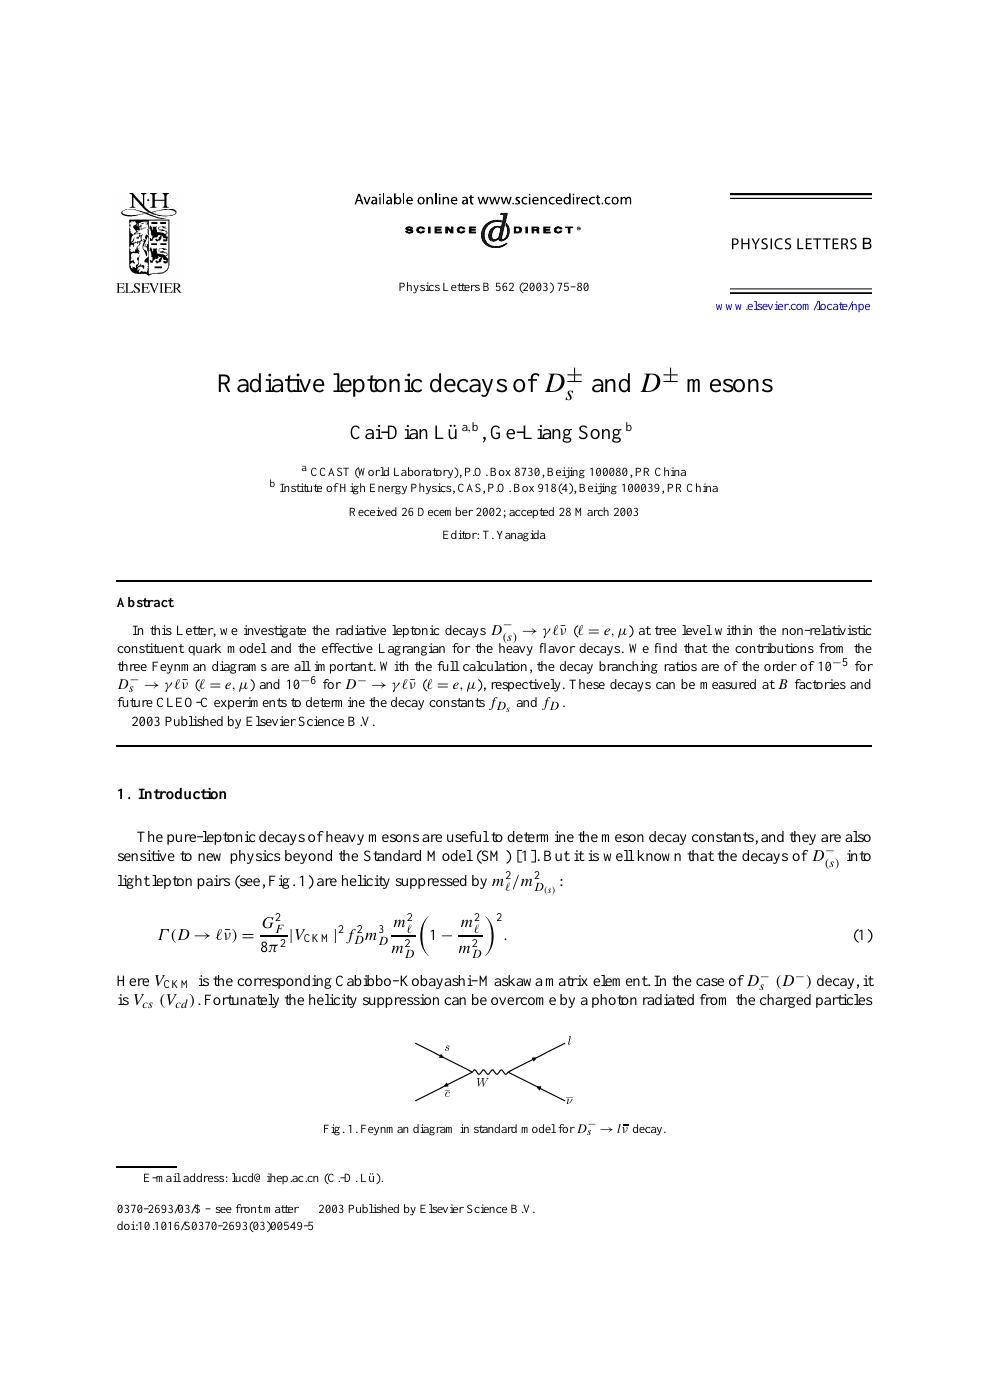 Radiative Leptonic Decays Of Ds And D Mesons Topic Of Research Paper In Physical Sciences Download Scholarly Article Pdf And Read For Free On Cyberleninka Open Science Hub